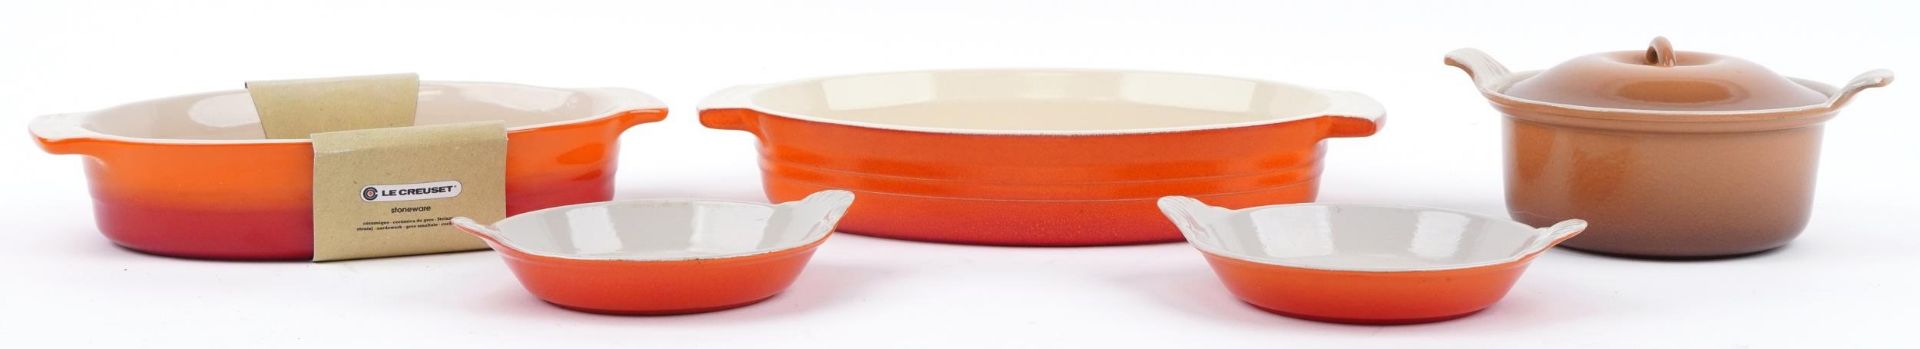 Le Creuset orange cooking dishes together with a Le Creuset crockpot with lid, the largest 35cm wide